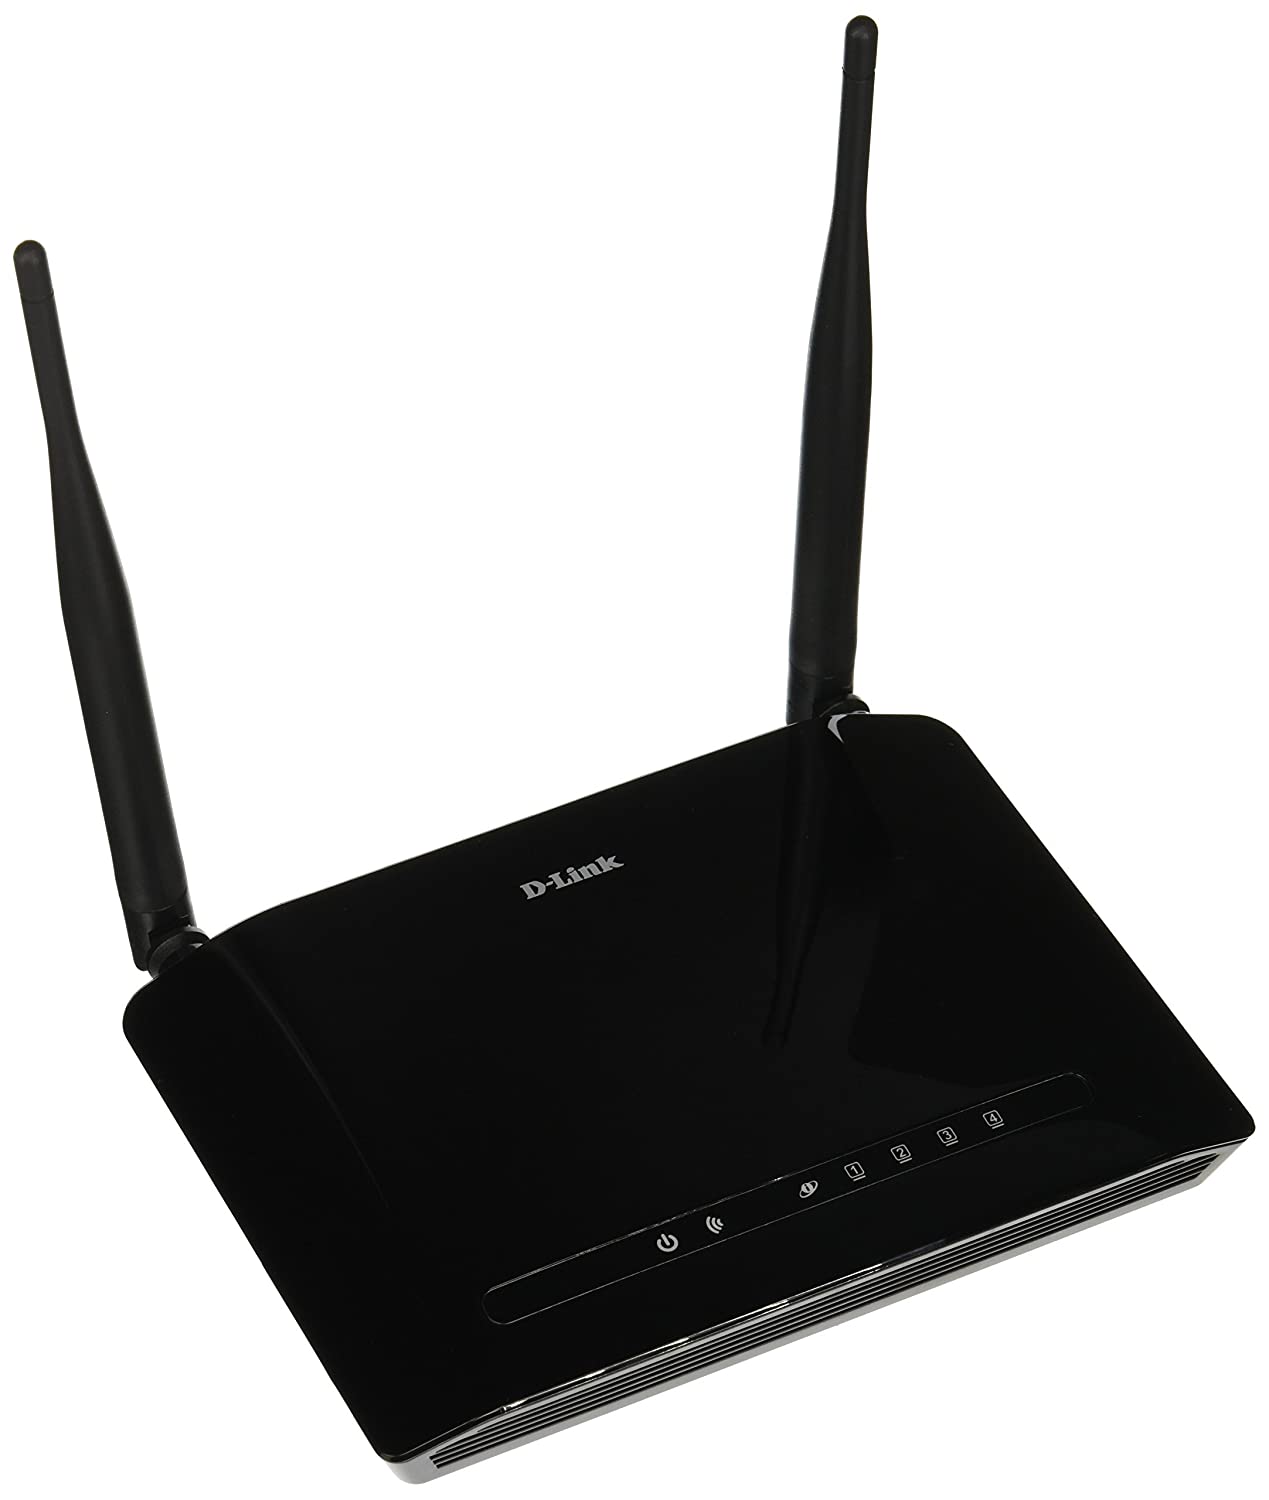 How to Set Up a D-Link Router